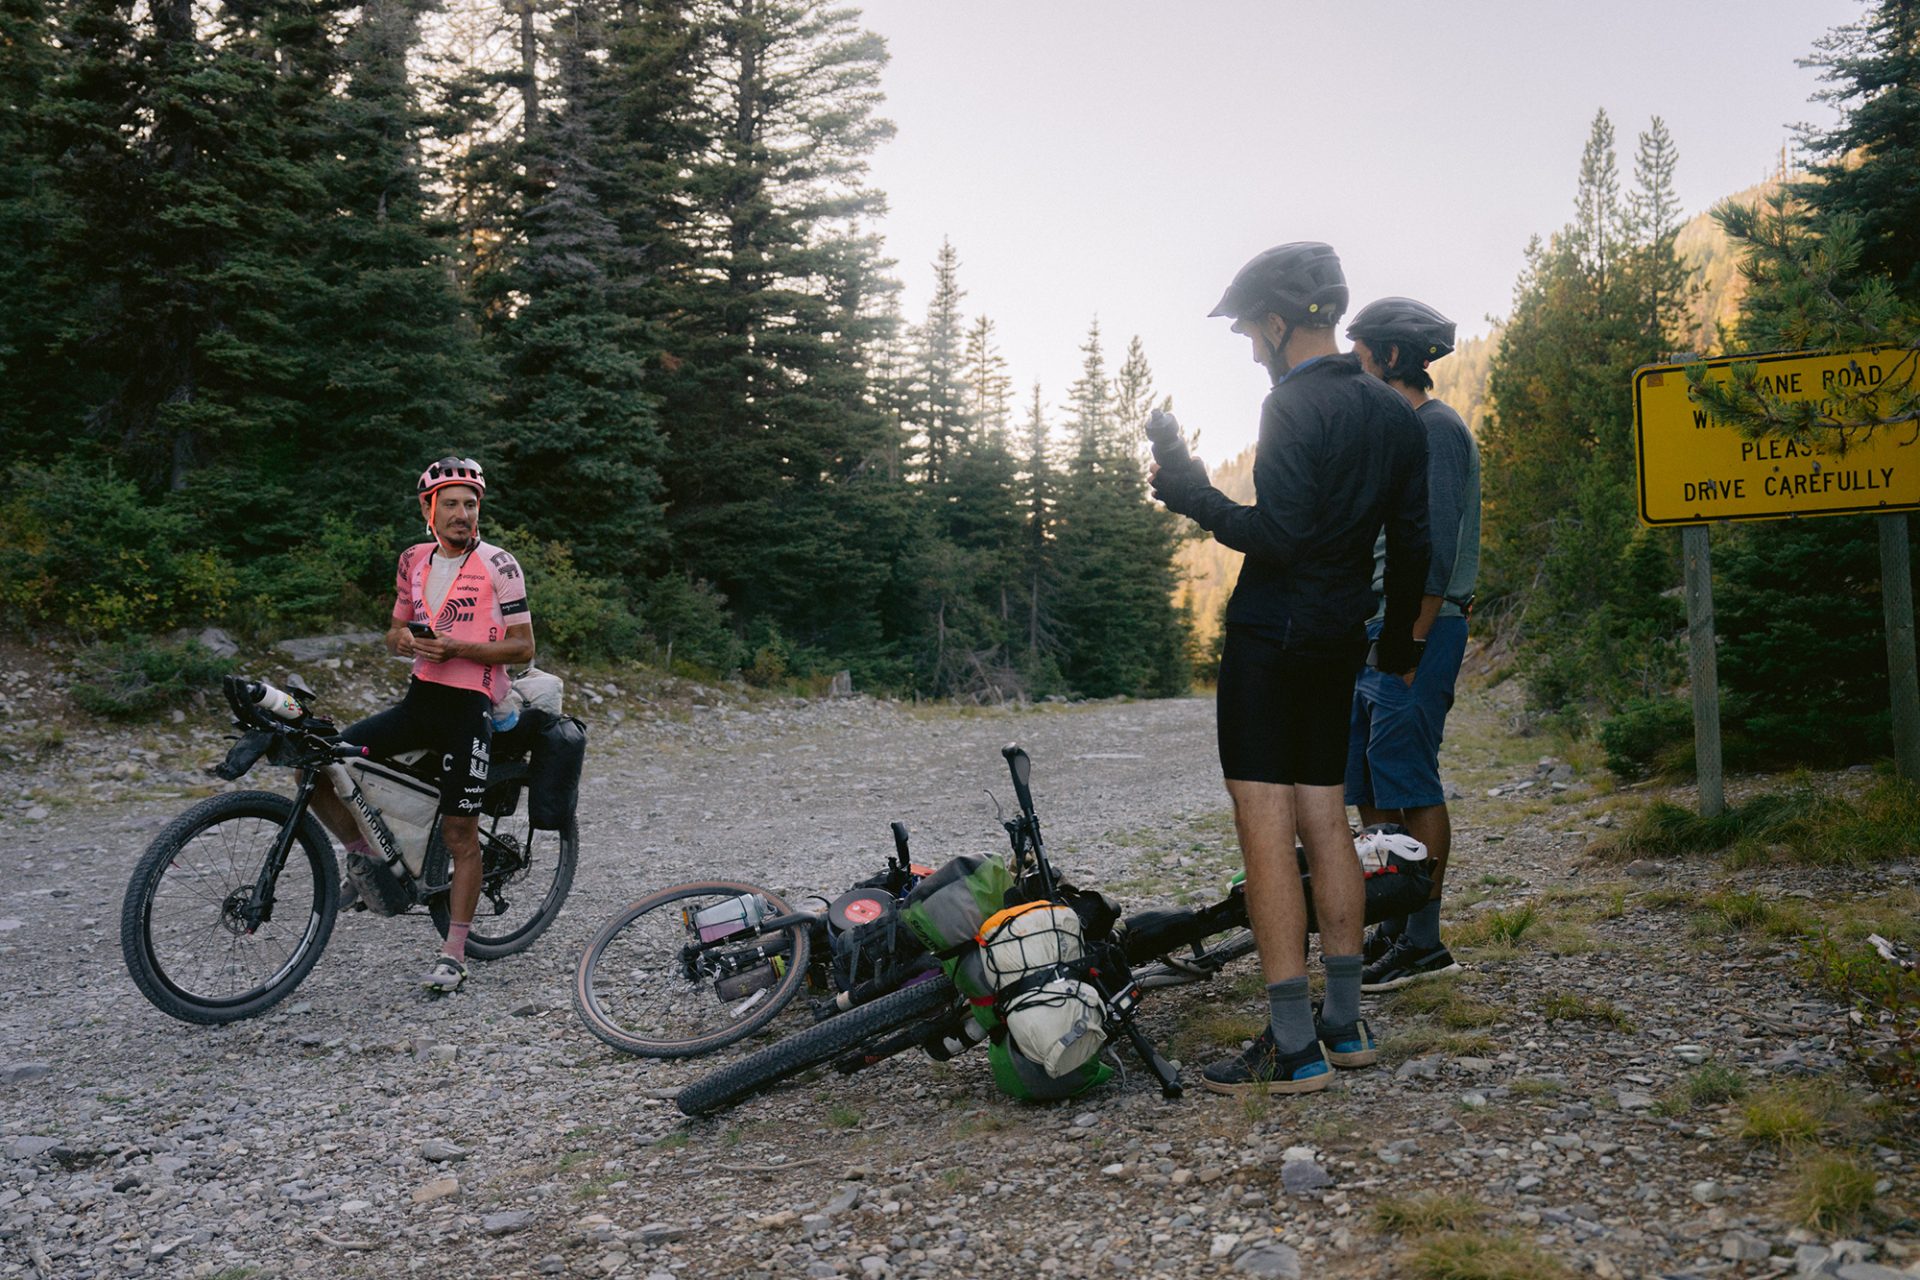 Lachlan chats to some mountain bikers on the trail.